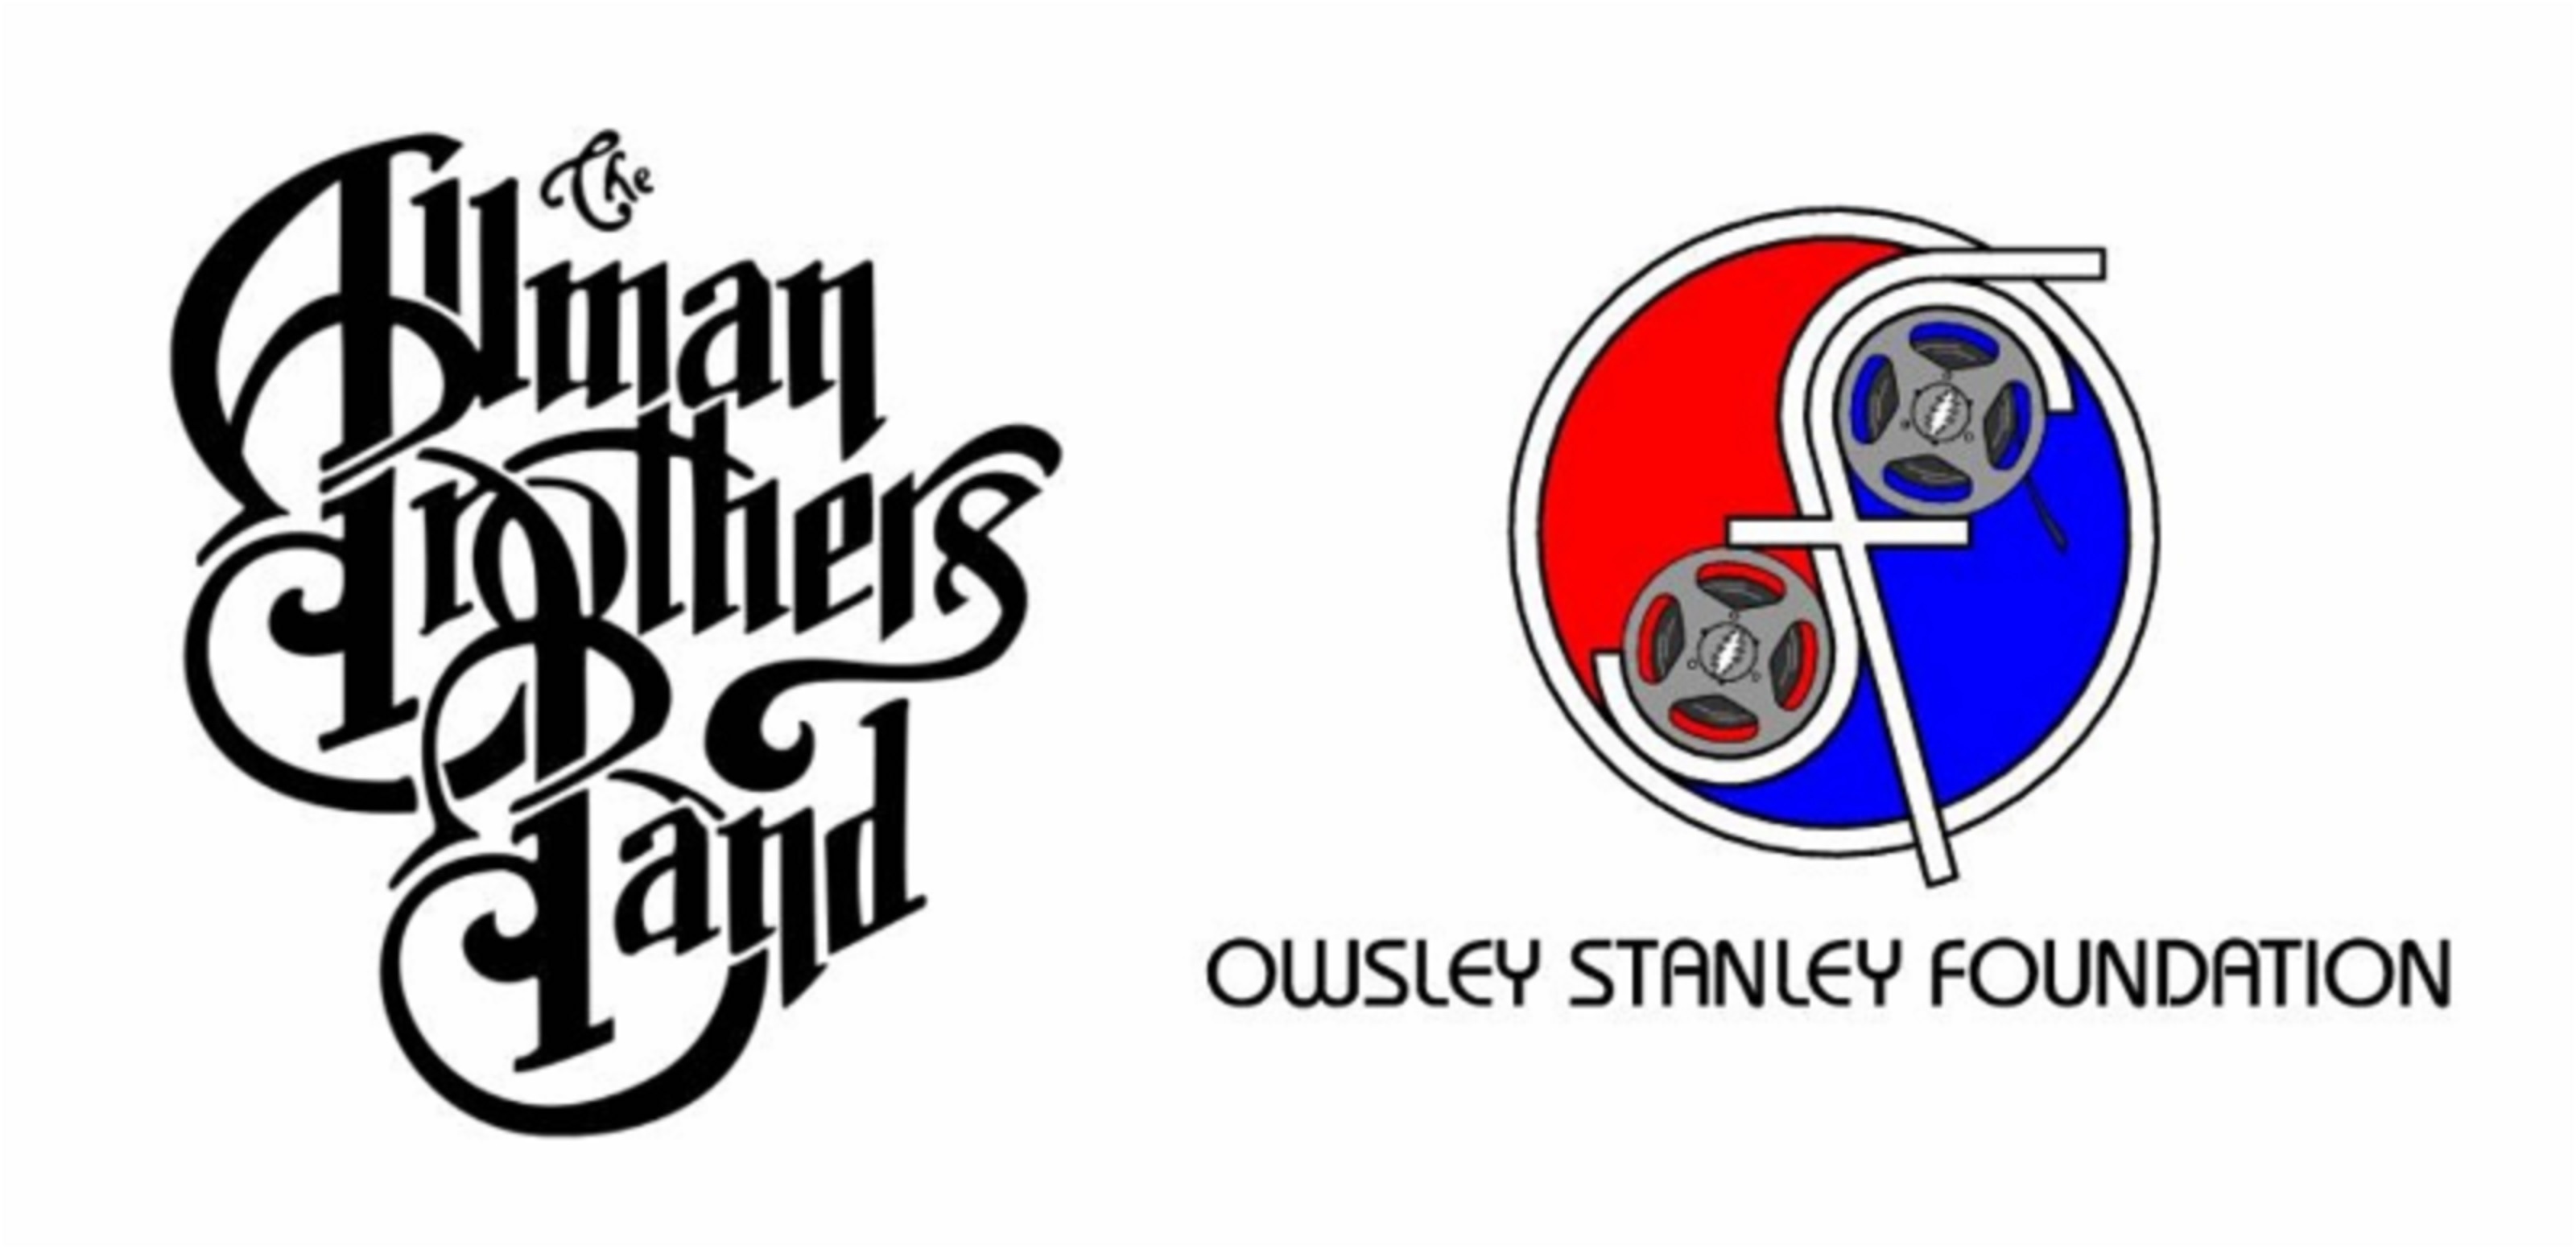 Allman Brothers Band, Owsley Stanley Foundation To Re-issue Complete 1970 Fillmore East Show